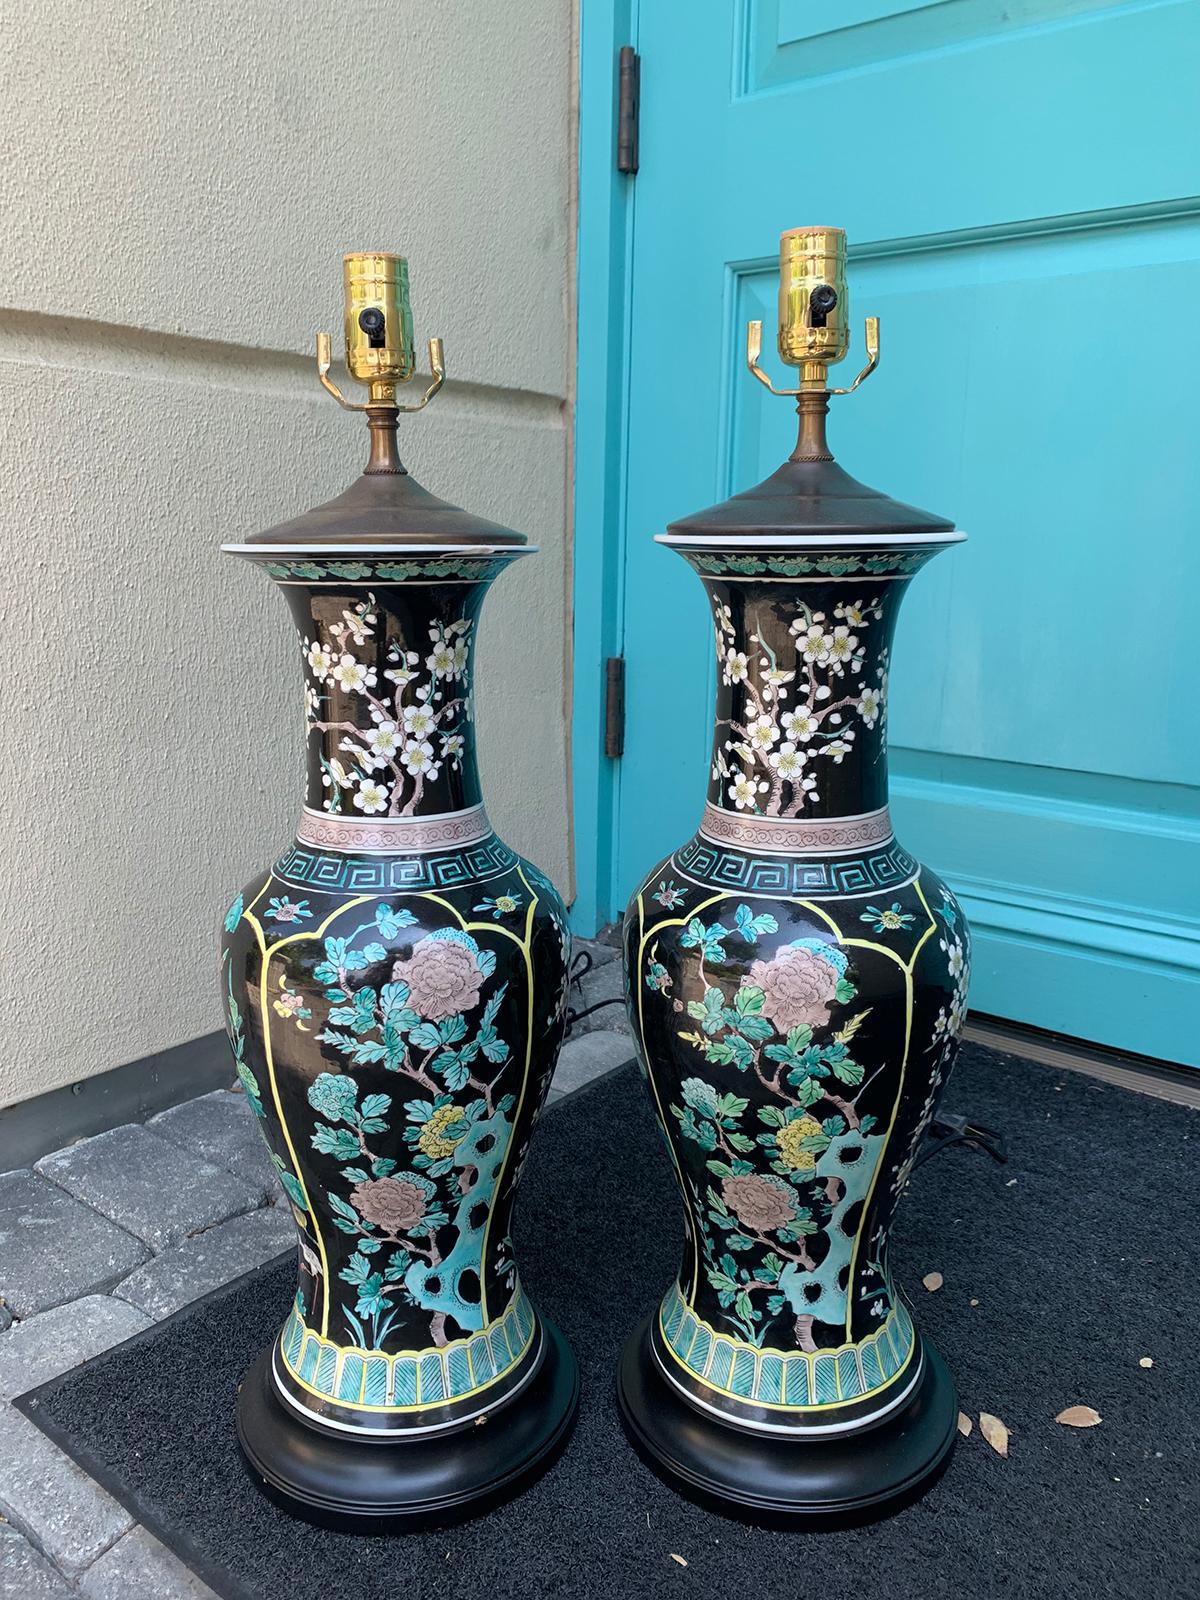 Pair of 20th century Chinese Famille noir porcelain lamps
New wiring.